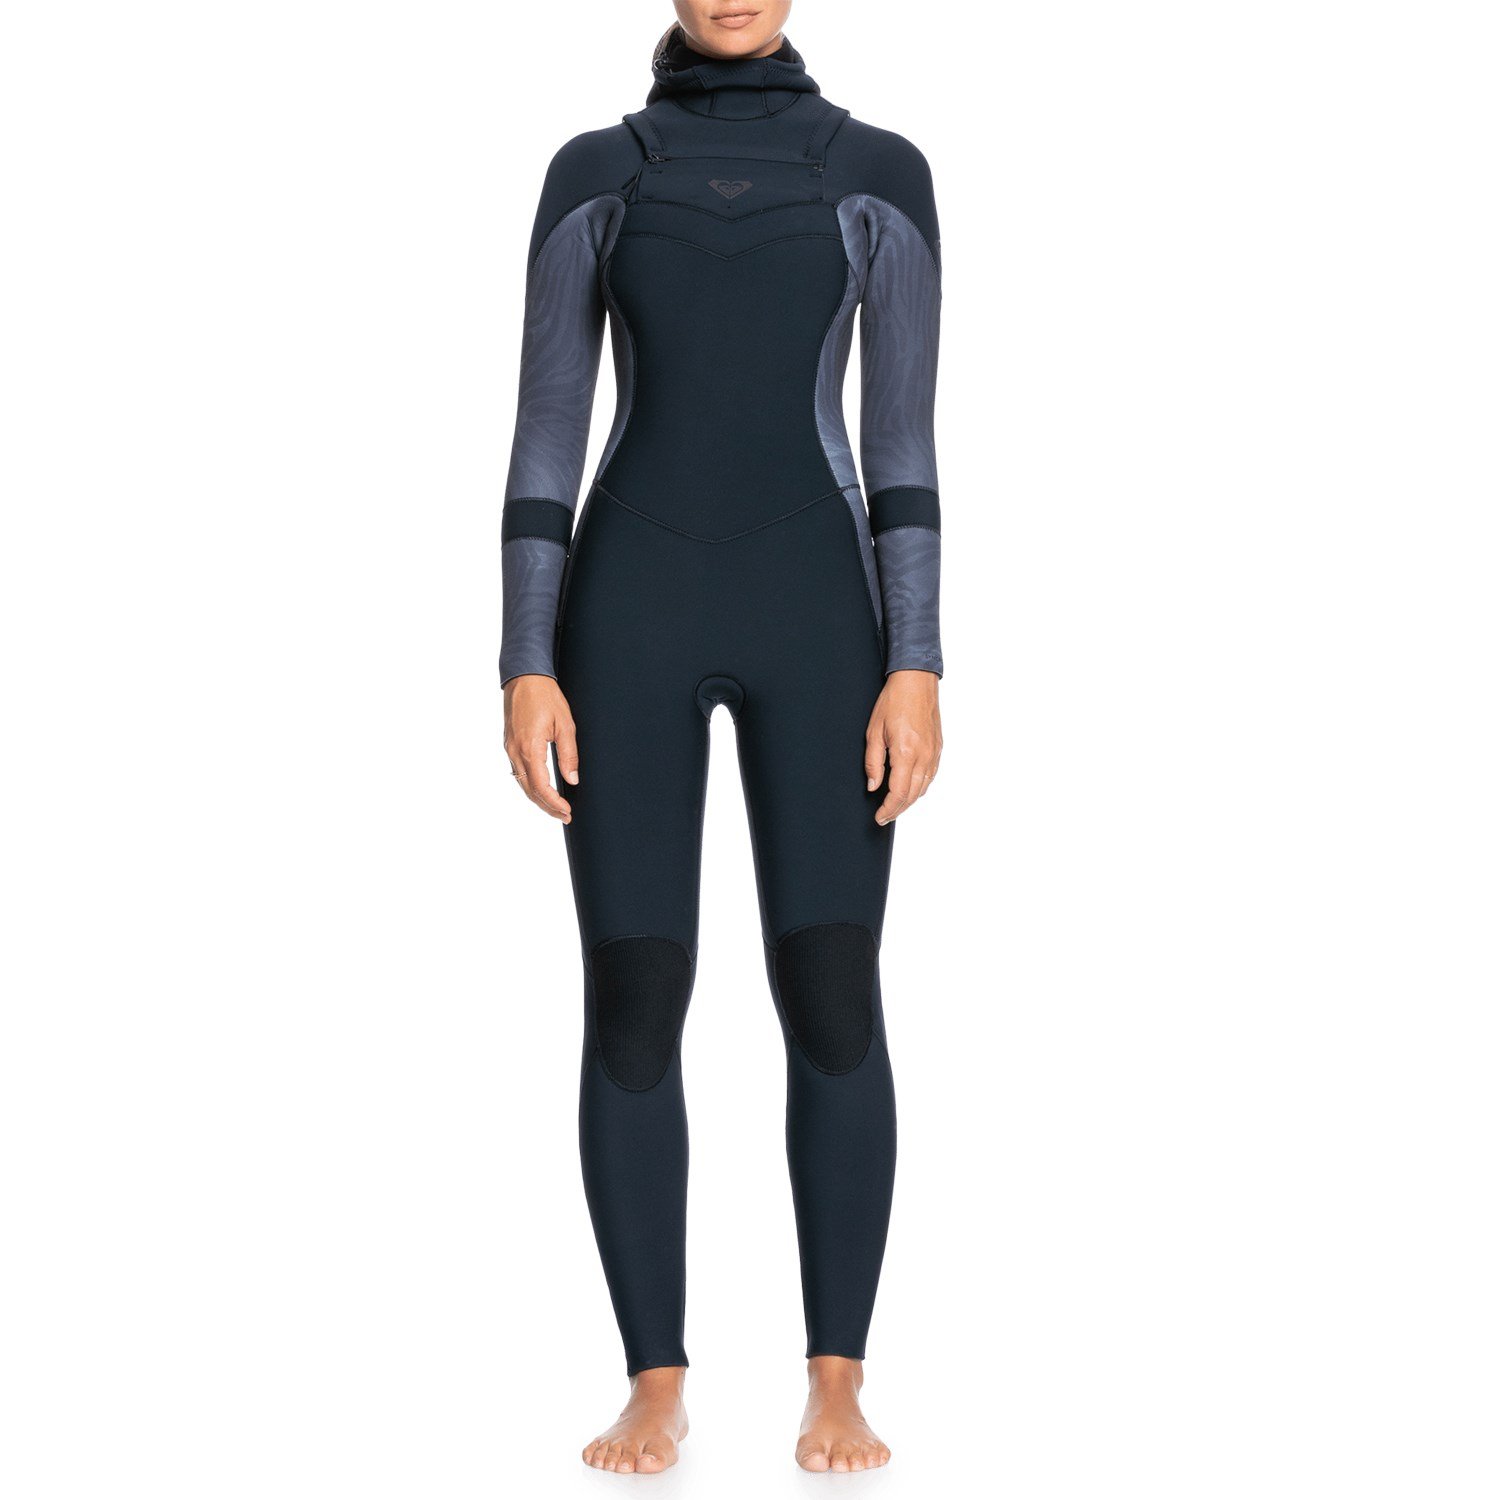 Details about   Roxy 4/3 Syncro Front Zip Wetsuit Women's 